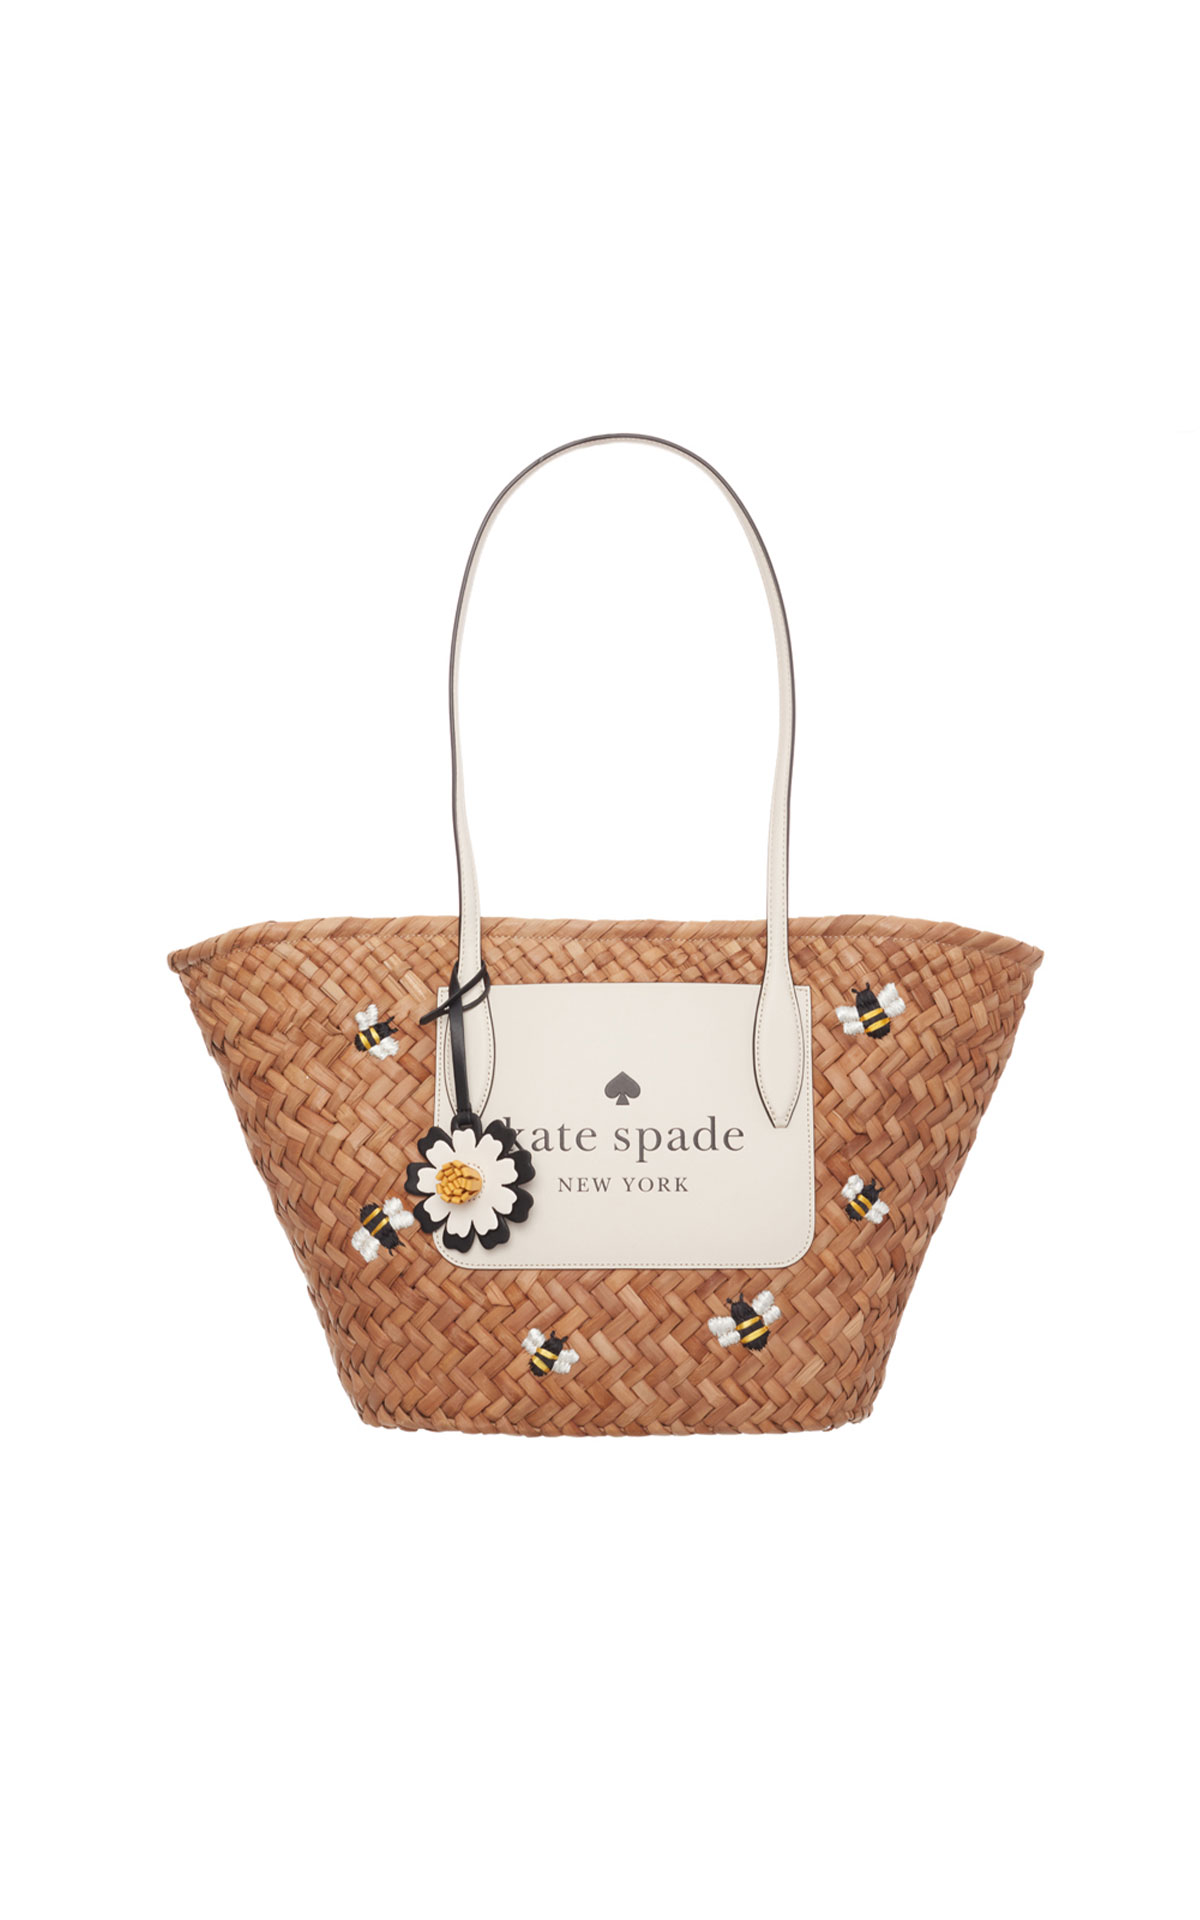 kate spade new york Wicker tote bag from Bicester Village